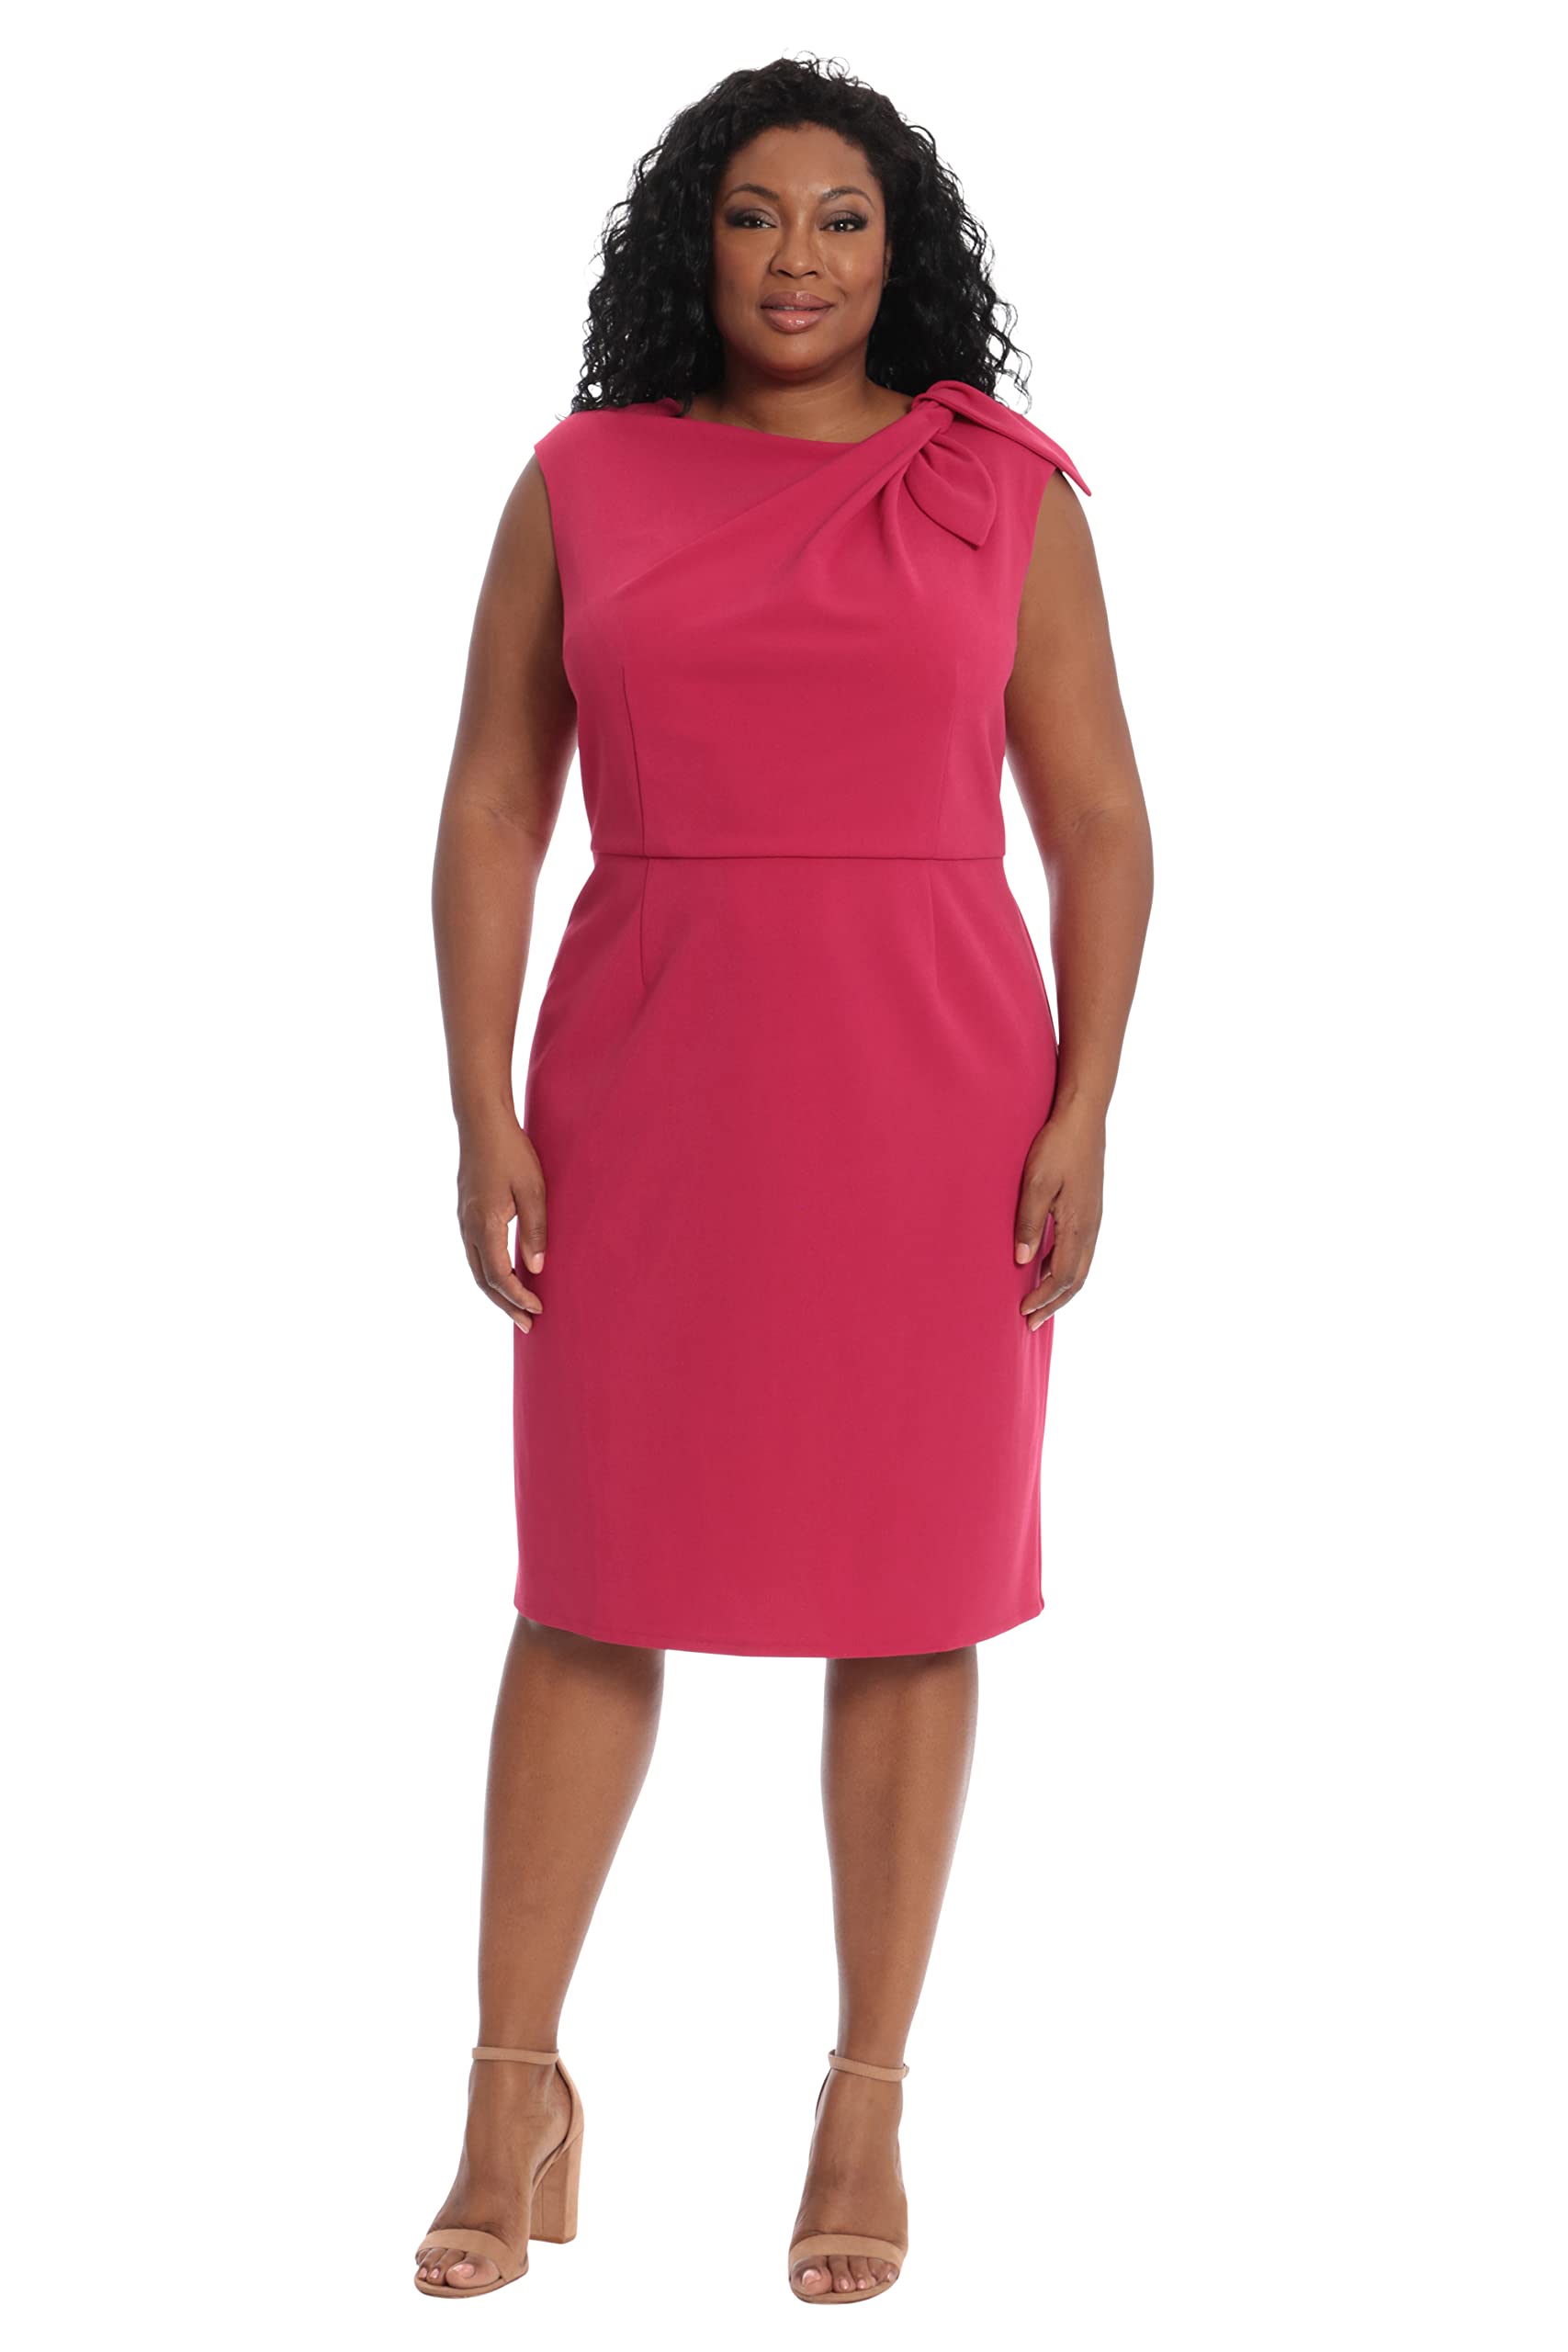 London Times Women's Sleeveless Sheath Dress with Draping and Bow Detail at Bodice